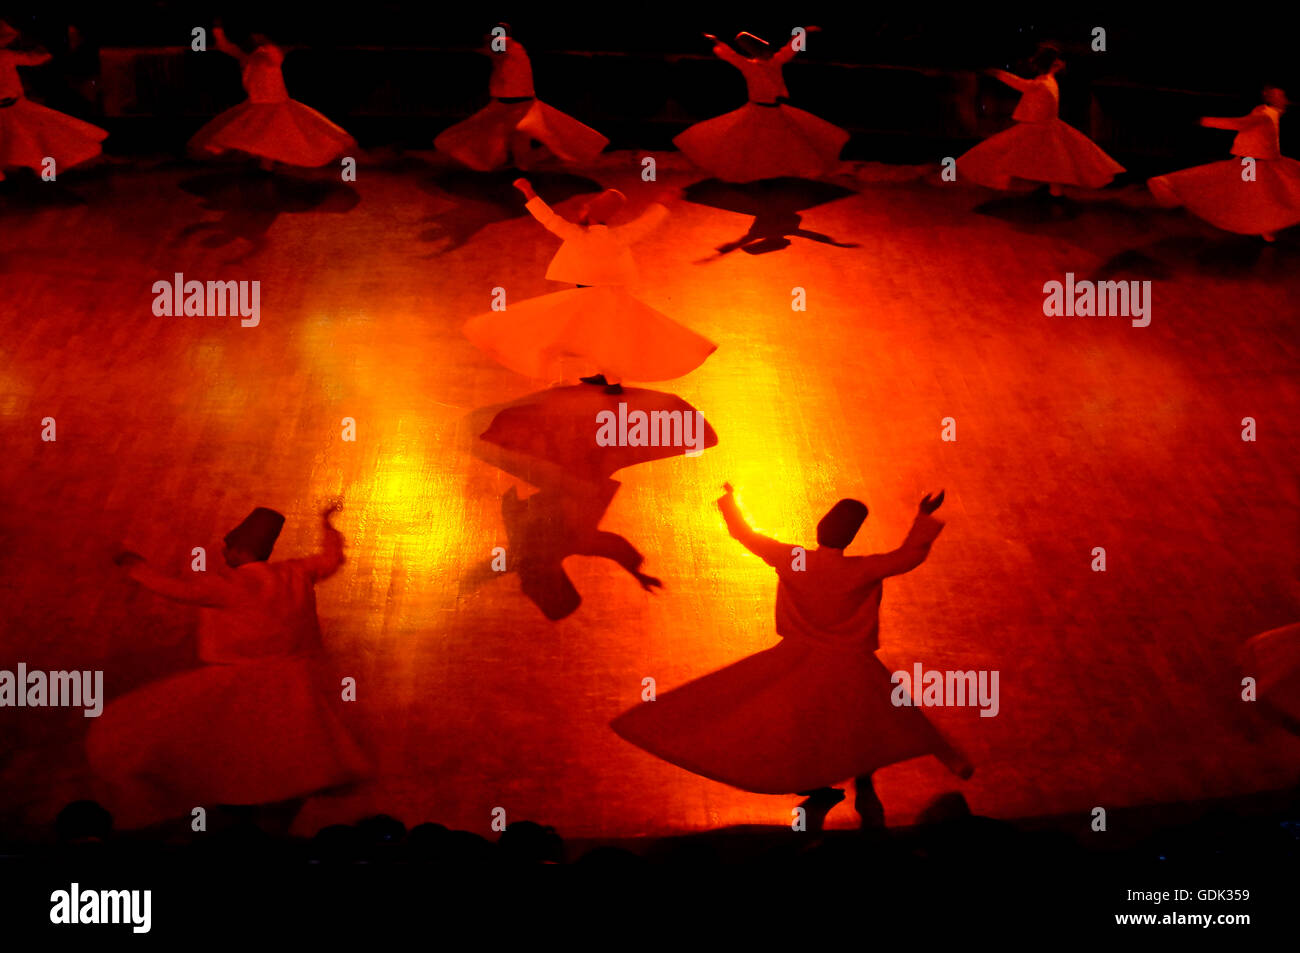 Sufi whirling, Konya, Anatolia, Turkey. Sufi whirling (or Sufi spinning) is a form of Sama or physically active meditation which originated among Sufis, and which is still practiced by the Sufi Dervishes of the Mevlevi order. It is a customary dance perfo Stock Photo